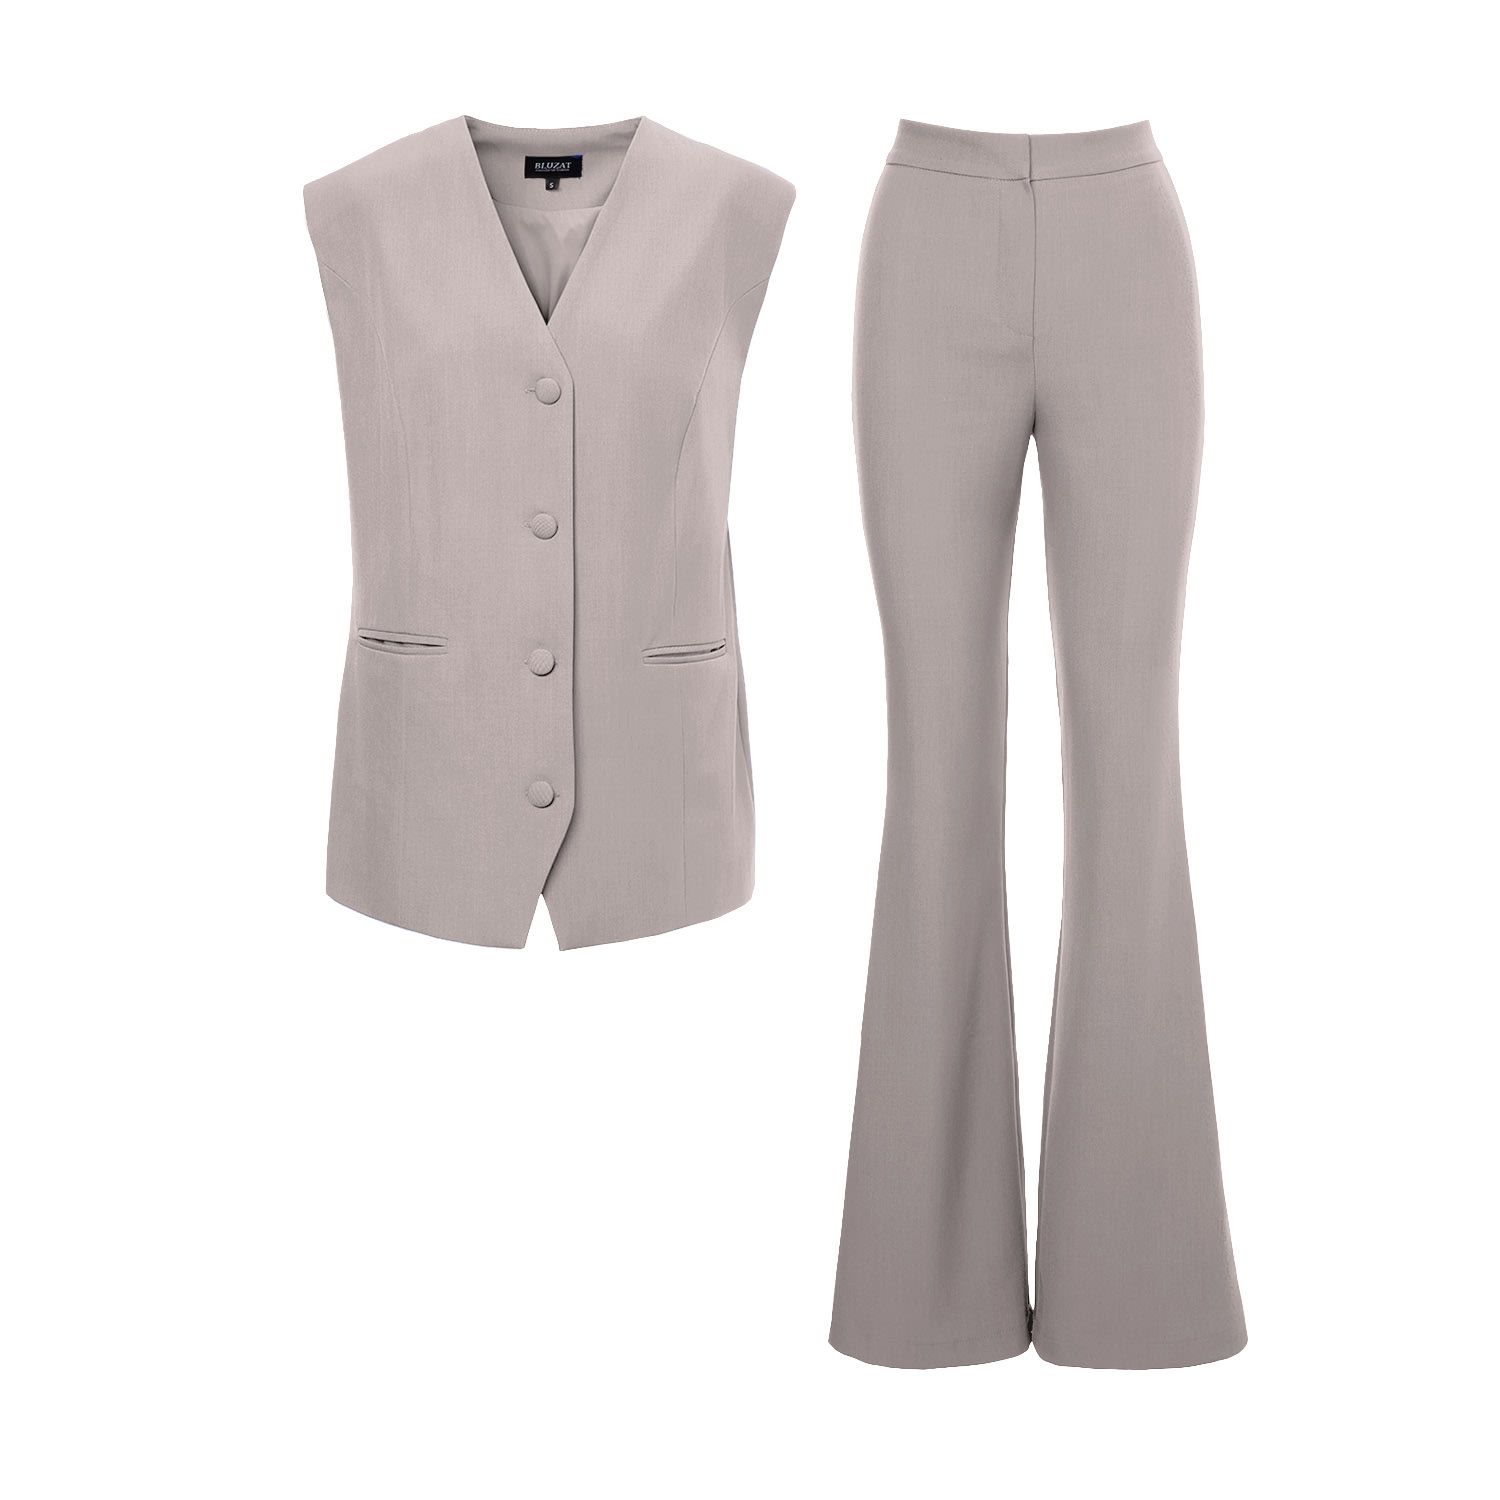 Women’s Neutrals Beige Suit With Oversized Vest And Flared Trousers Small Bluzat